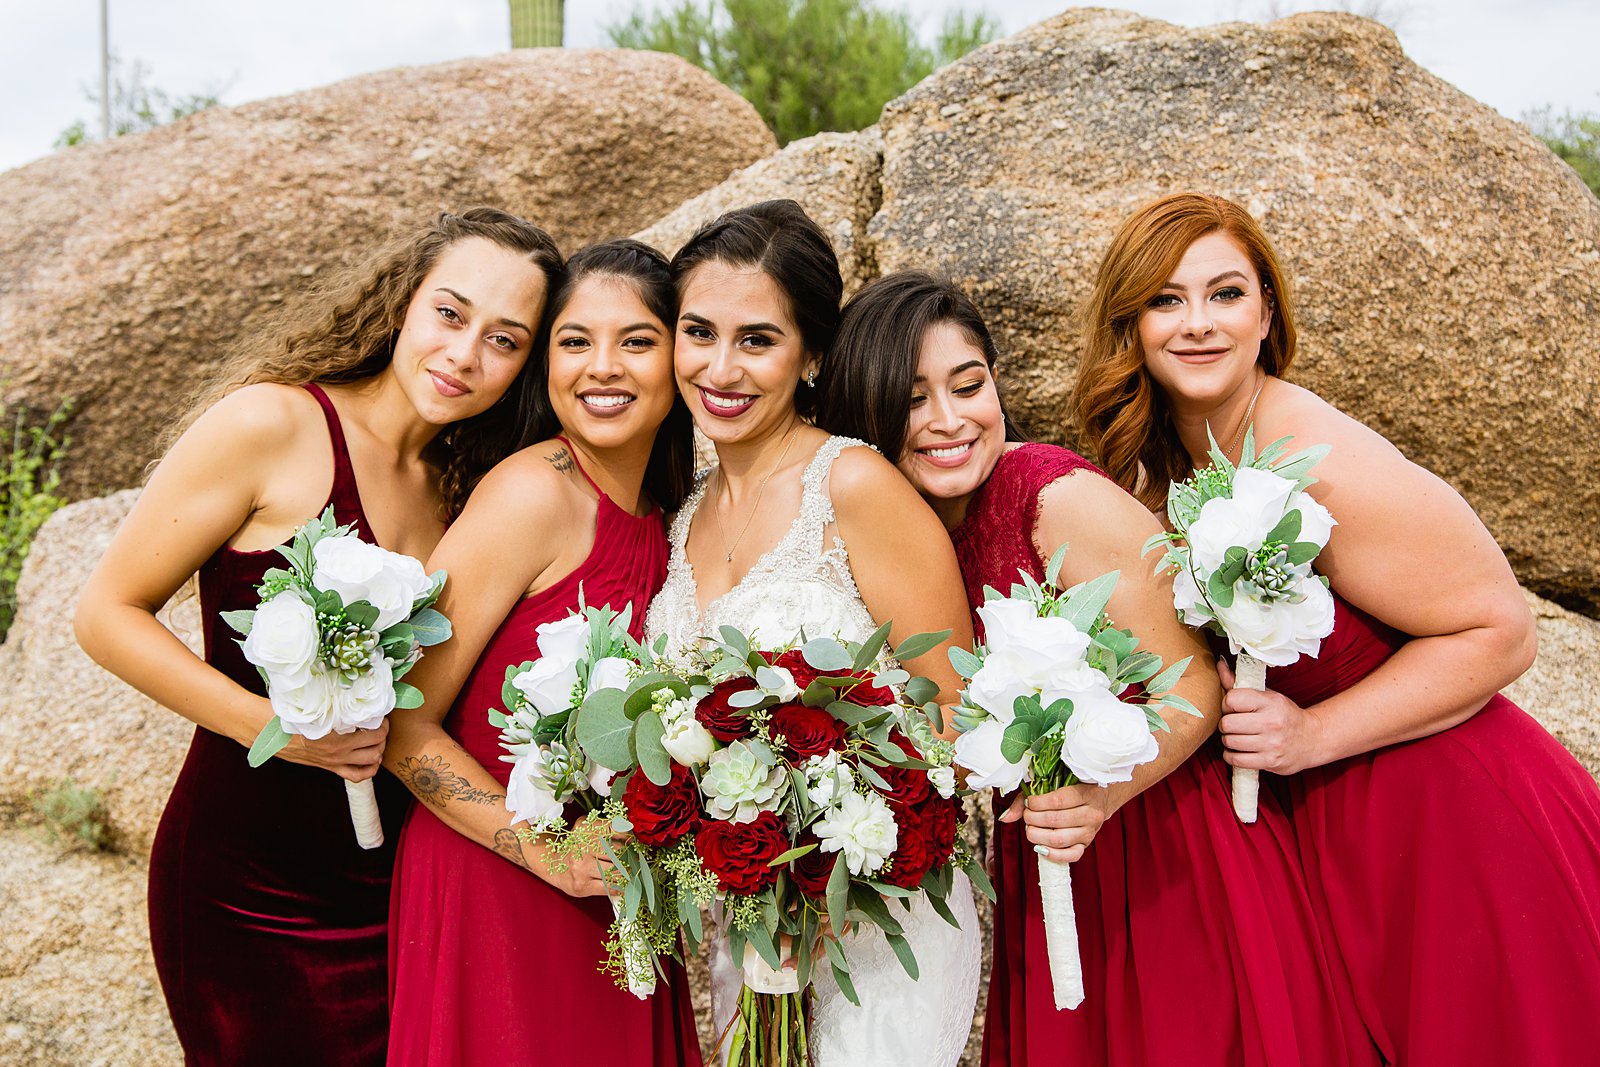 Bride and bridesmaids together at a Troon North wedding by Arizona wedding photographer PMA Photography.